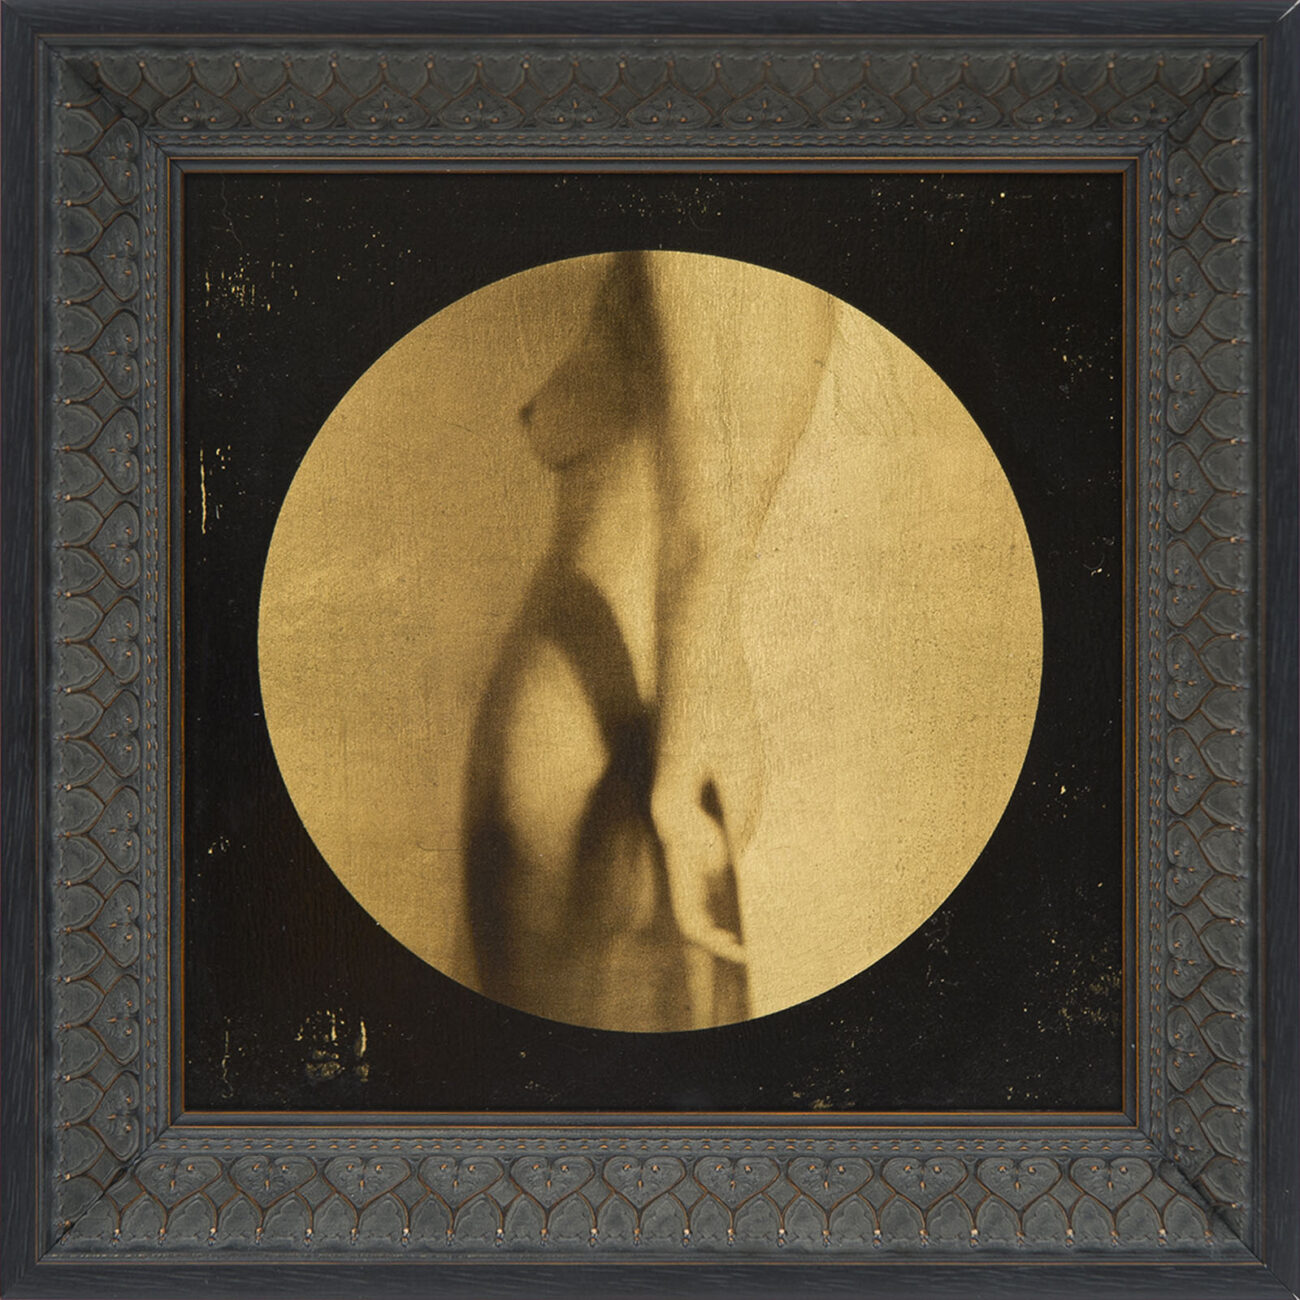 Corinne Héraud, Series Corpus, “Corpus # 2”, 2017, Photography and mixed media on gold leaf and wood, 30 x 30 cm, Edition: 5 + 2 AP, Courtesy: Courcelles Art Contemporain